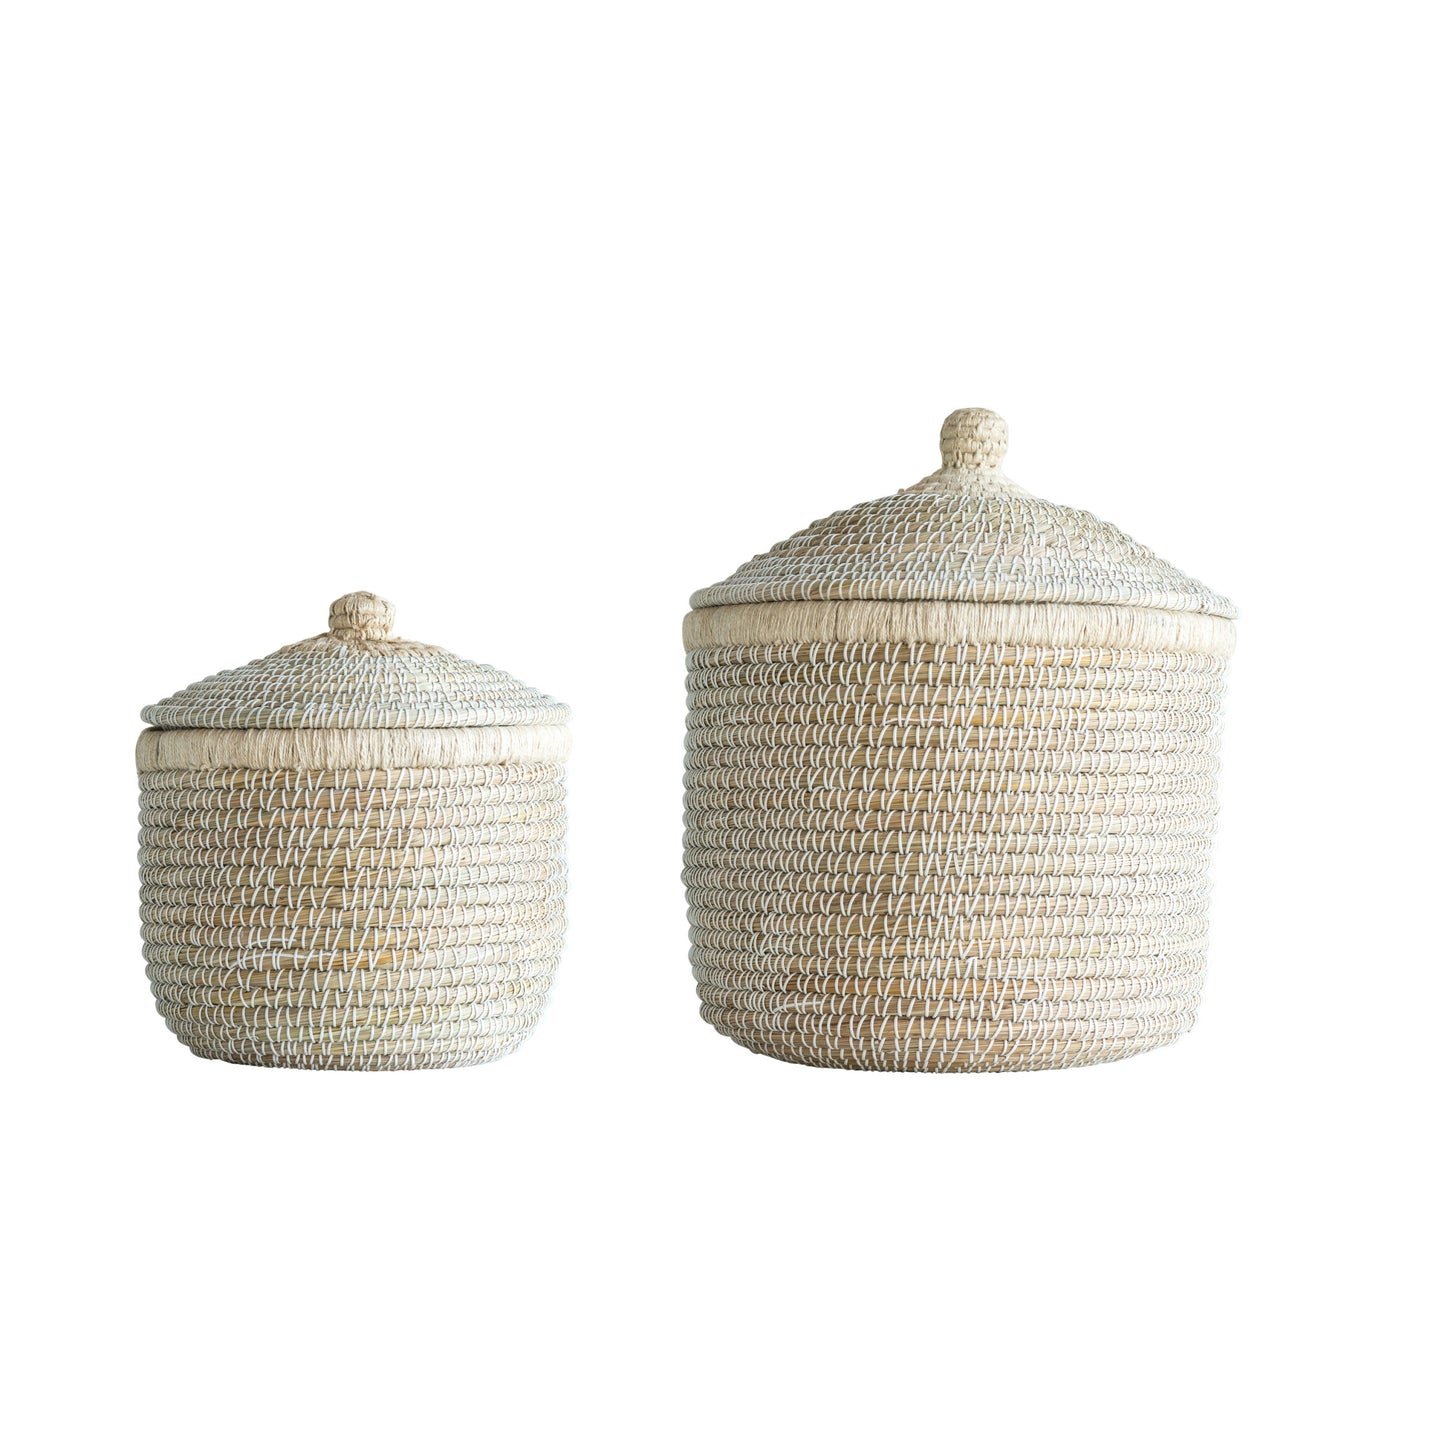 Woven Seagrass Basket with Lid - 2 Sizes